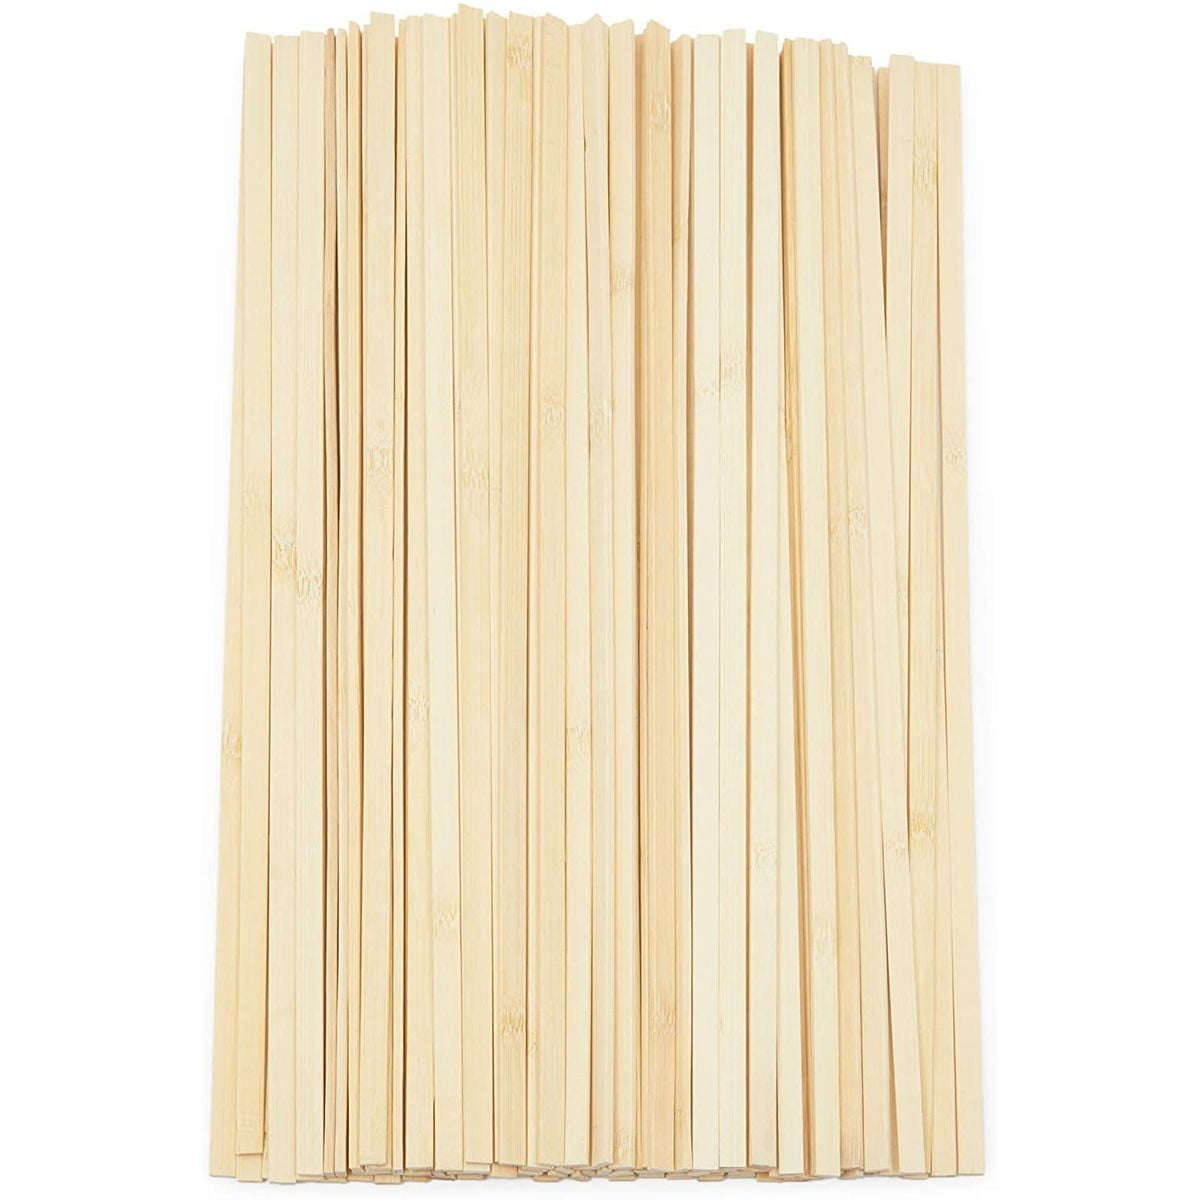 200 Natural Wood Craft, Popsicle Sticks for Crafts 4.5 Inch, Waxing  Spatulas, Epoxy Resin Stirring, Ice Cream Candy Making and Garden Markers.  Smooth, Splinter-Free, Wooden Wax Sticks 